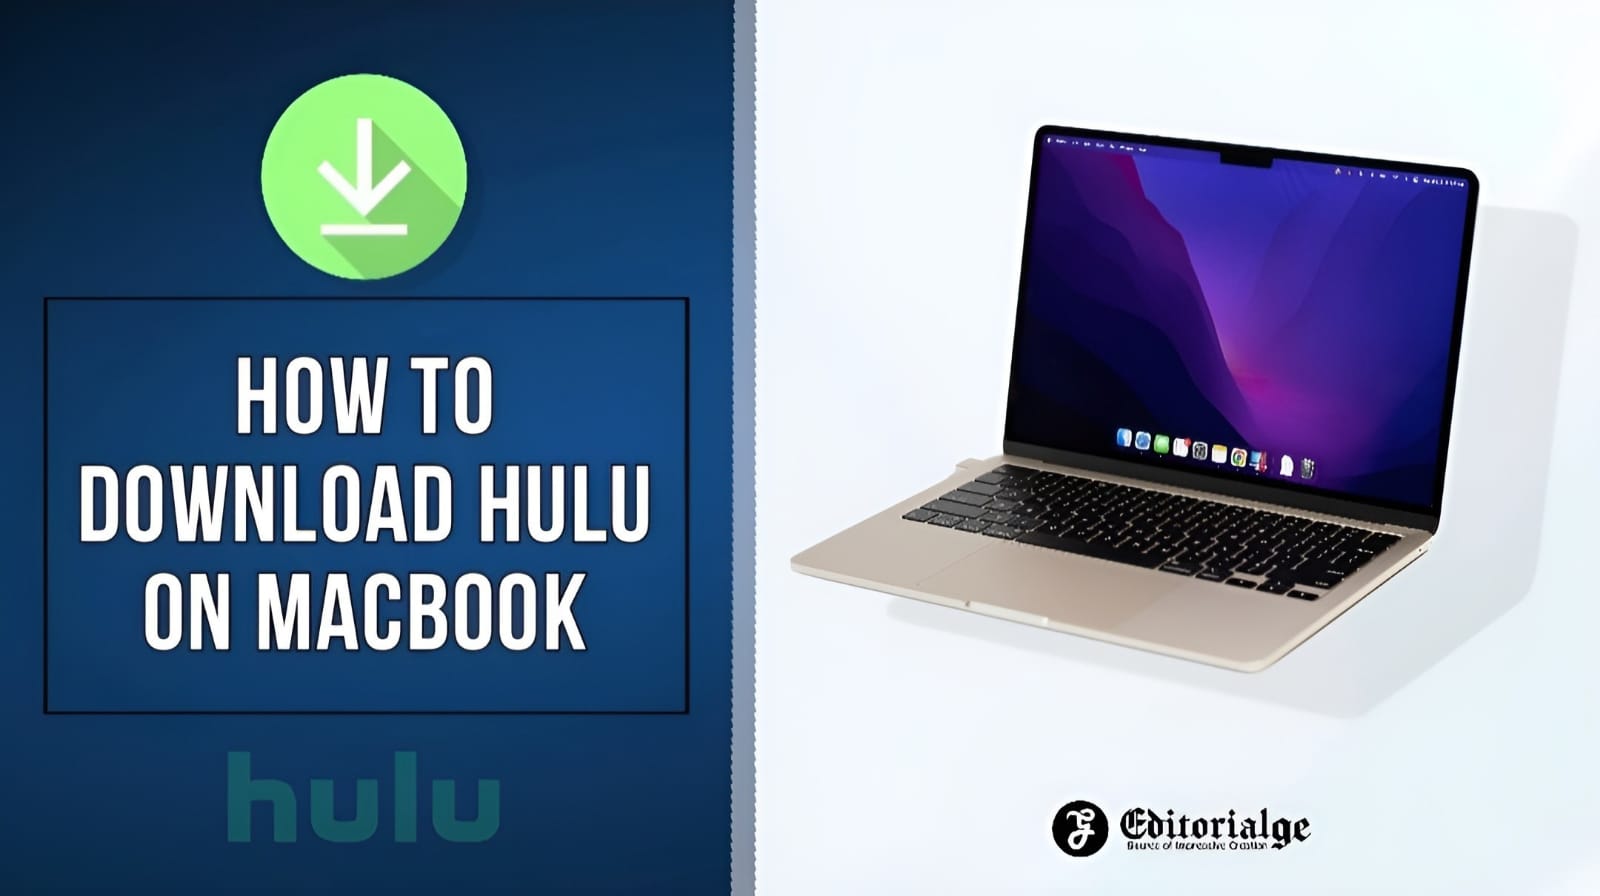 How to download hulu on macbook